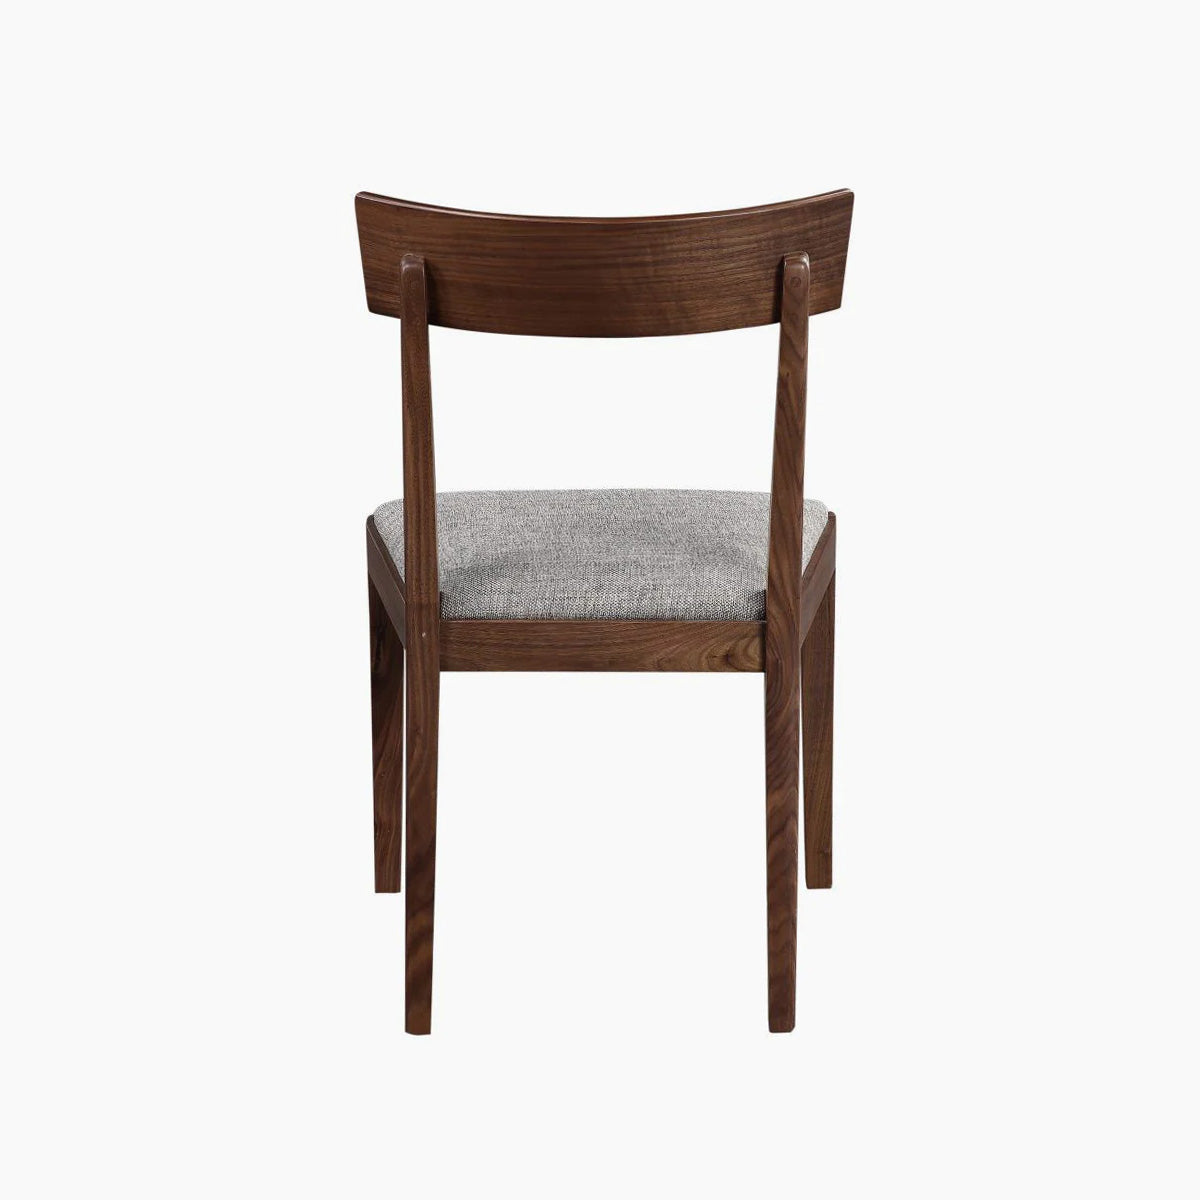 Roxane Dining Chair - Brown - Set of 2